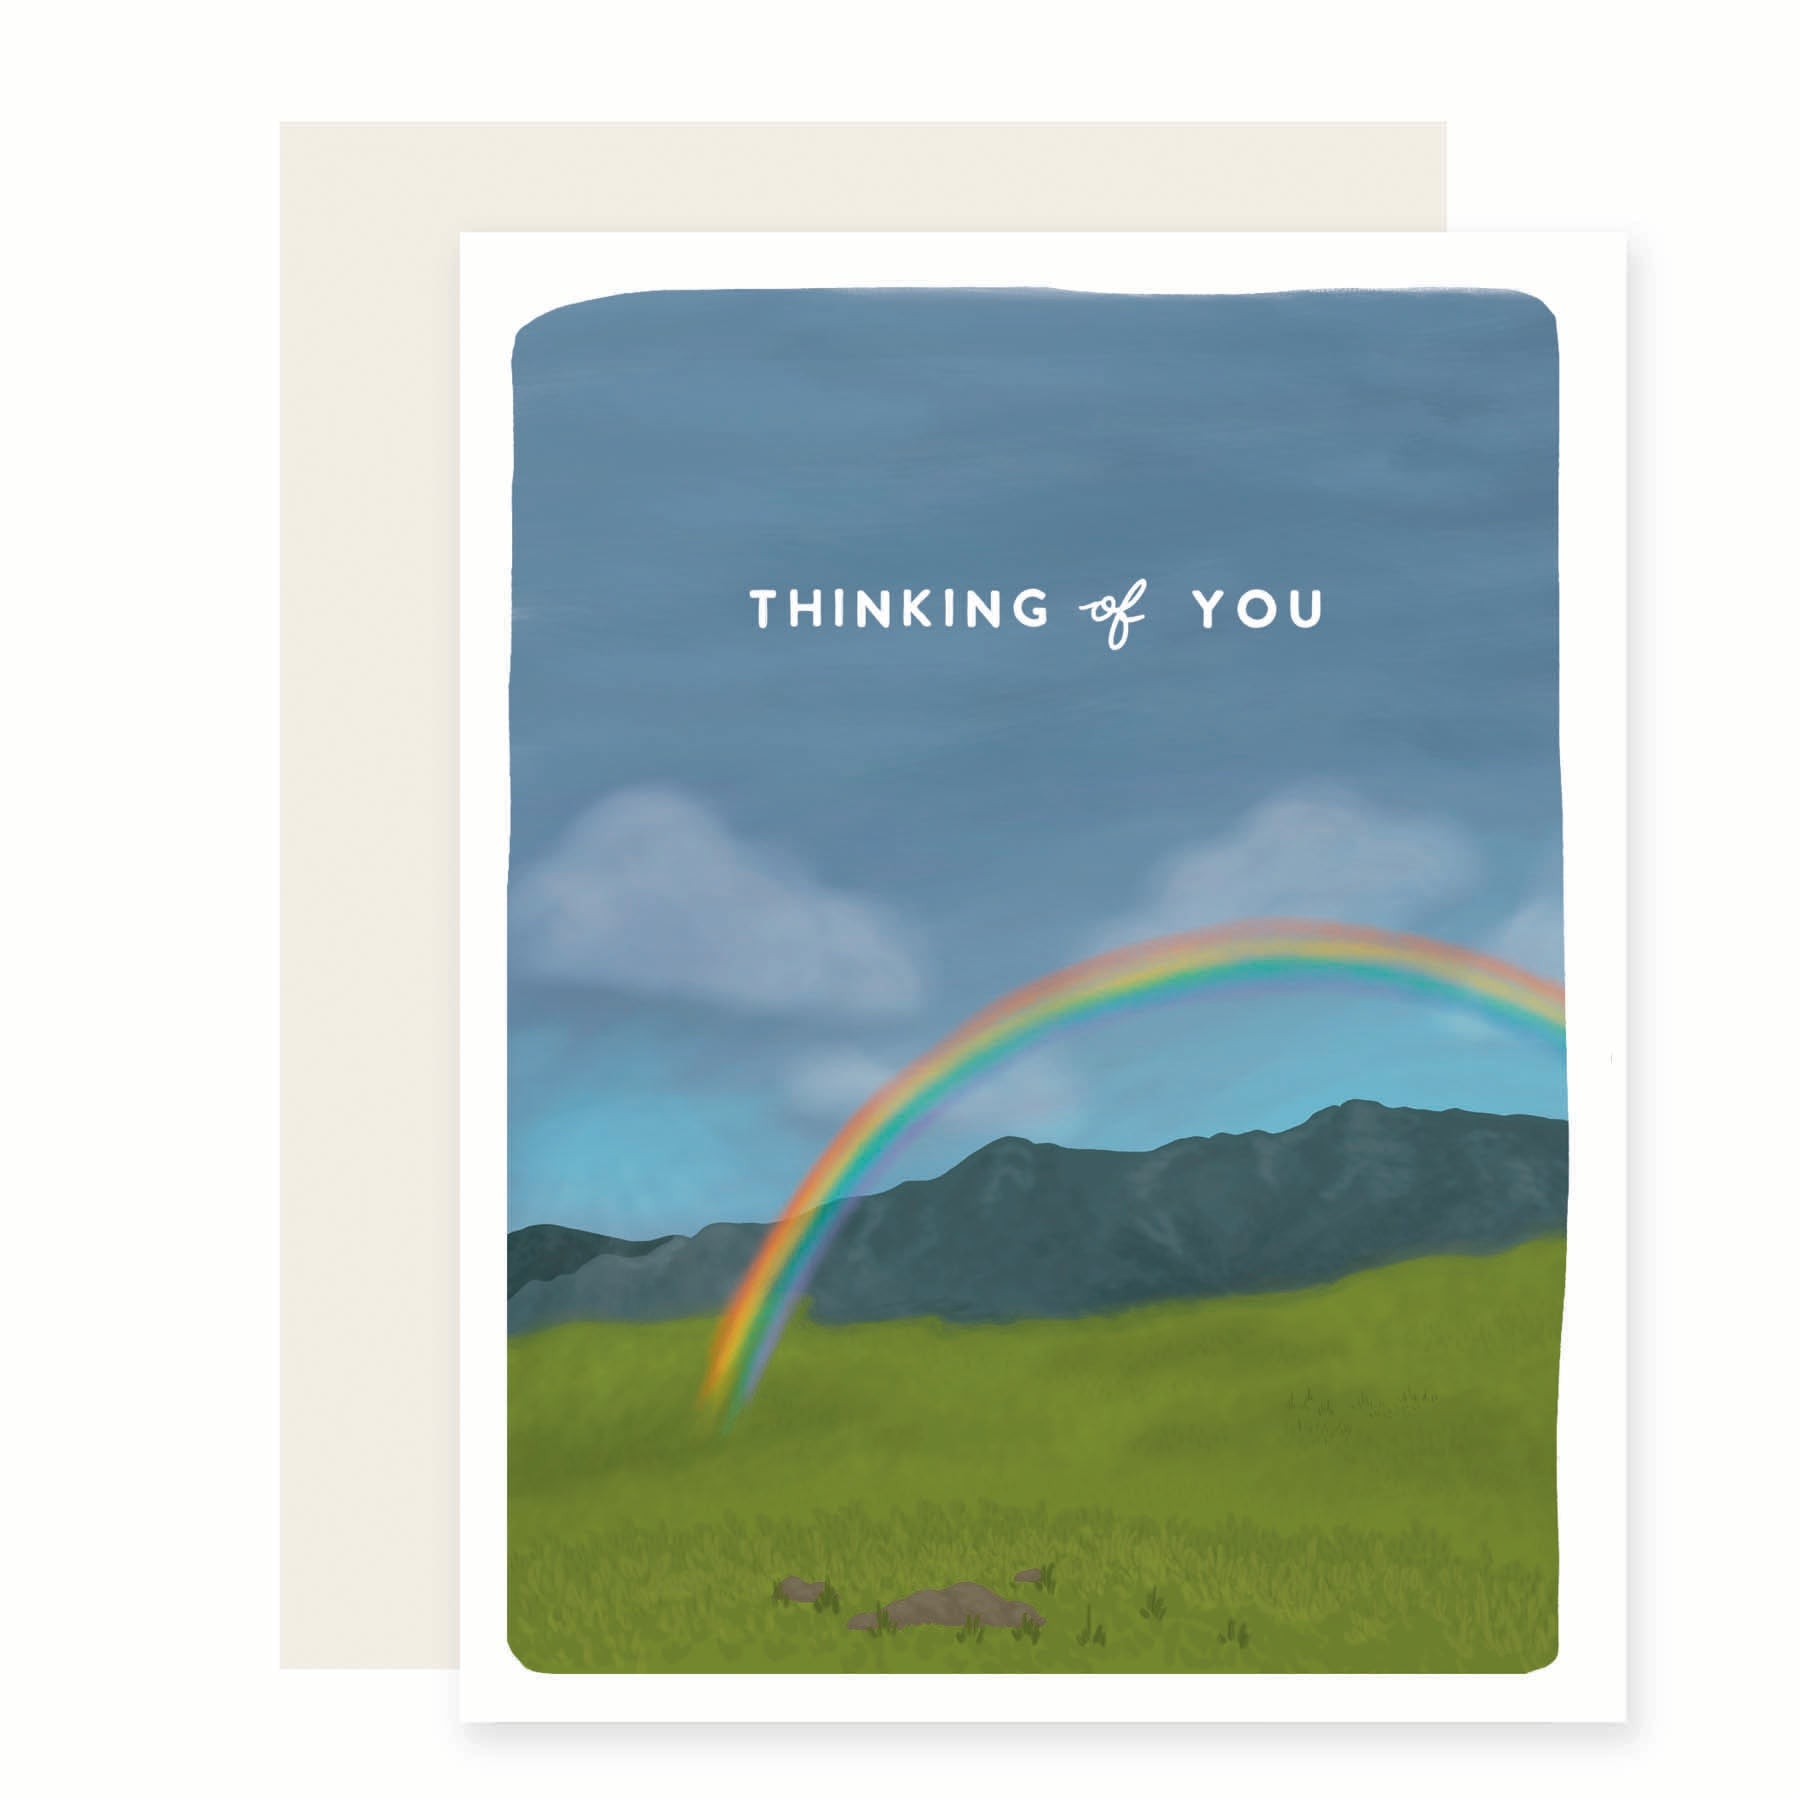 White card with meadow scene with green pasture, mountains in background, blue sky with white clouds and a rainbow across the middle of card. White text saying, “Thinking of You”. A white envelope is included.